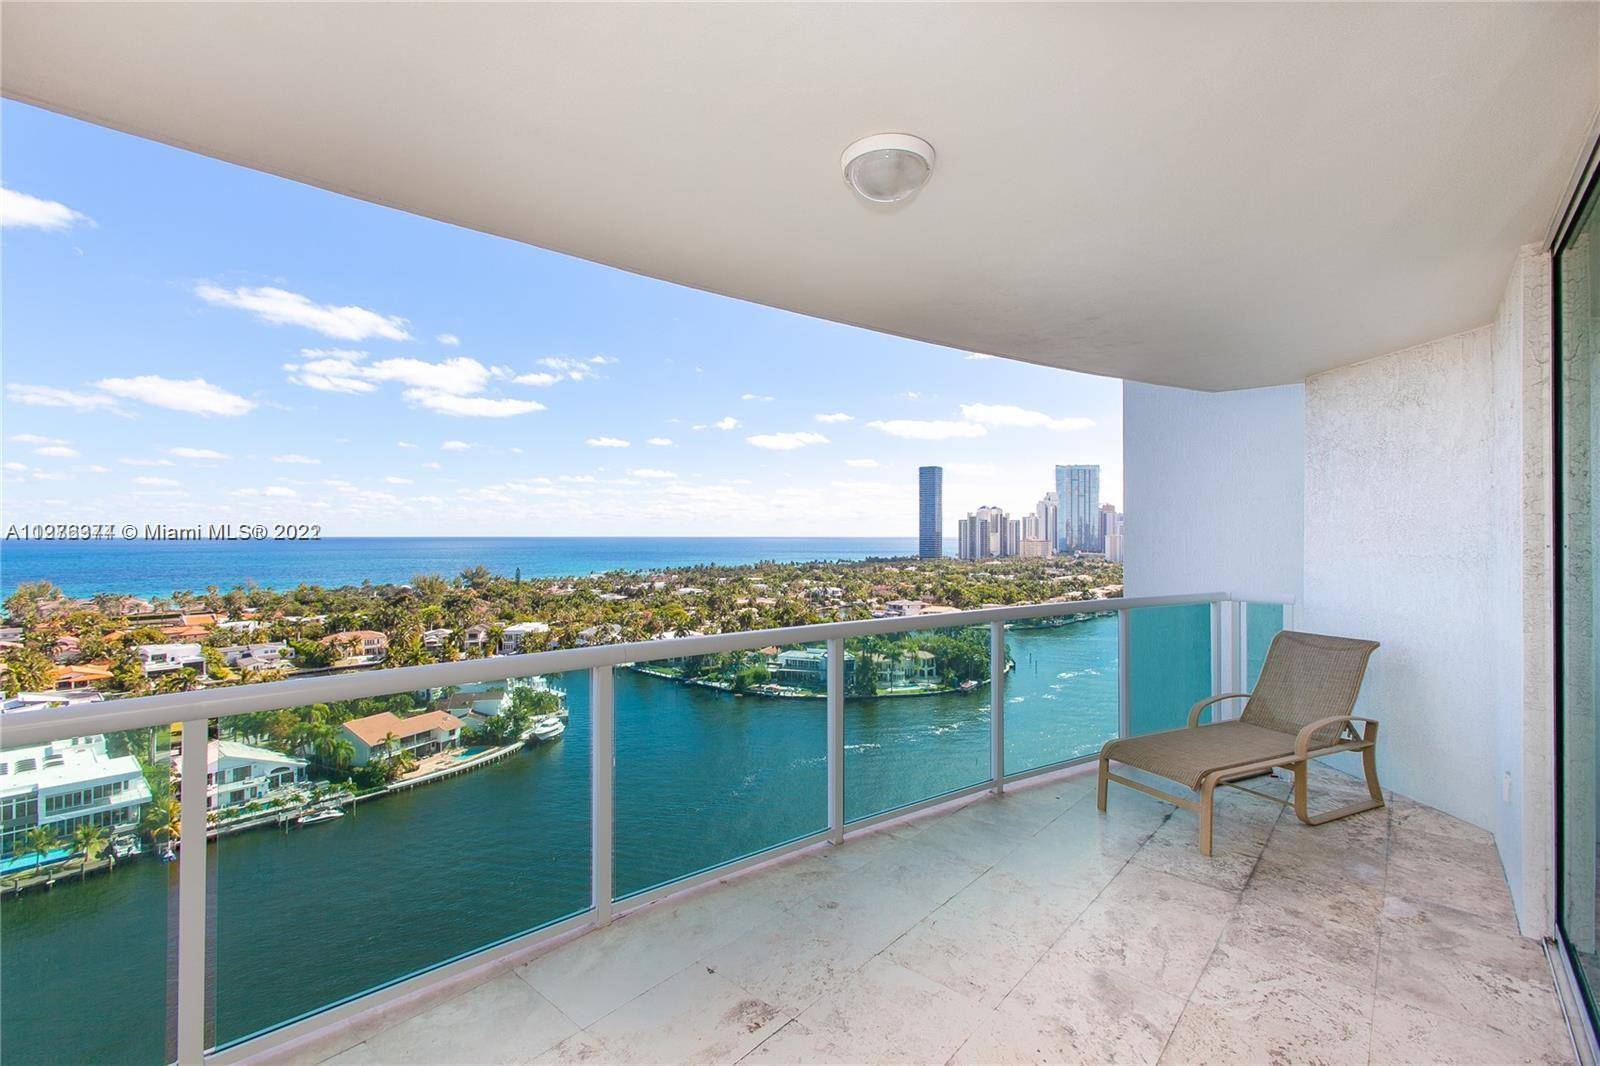 Welcome to this elegant flow thru private residence with over 3200 sqft boasting breathtaking ocean and Intracoastal views featuring 3 BR plus Den, 3 baths and private elevator.